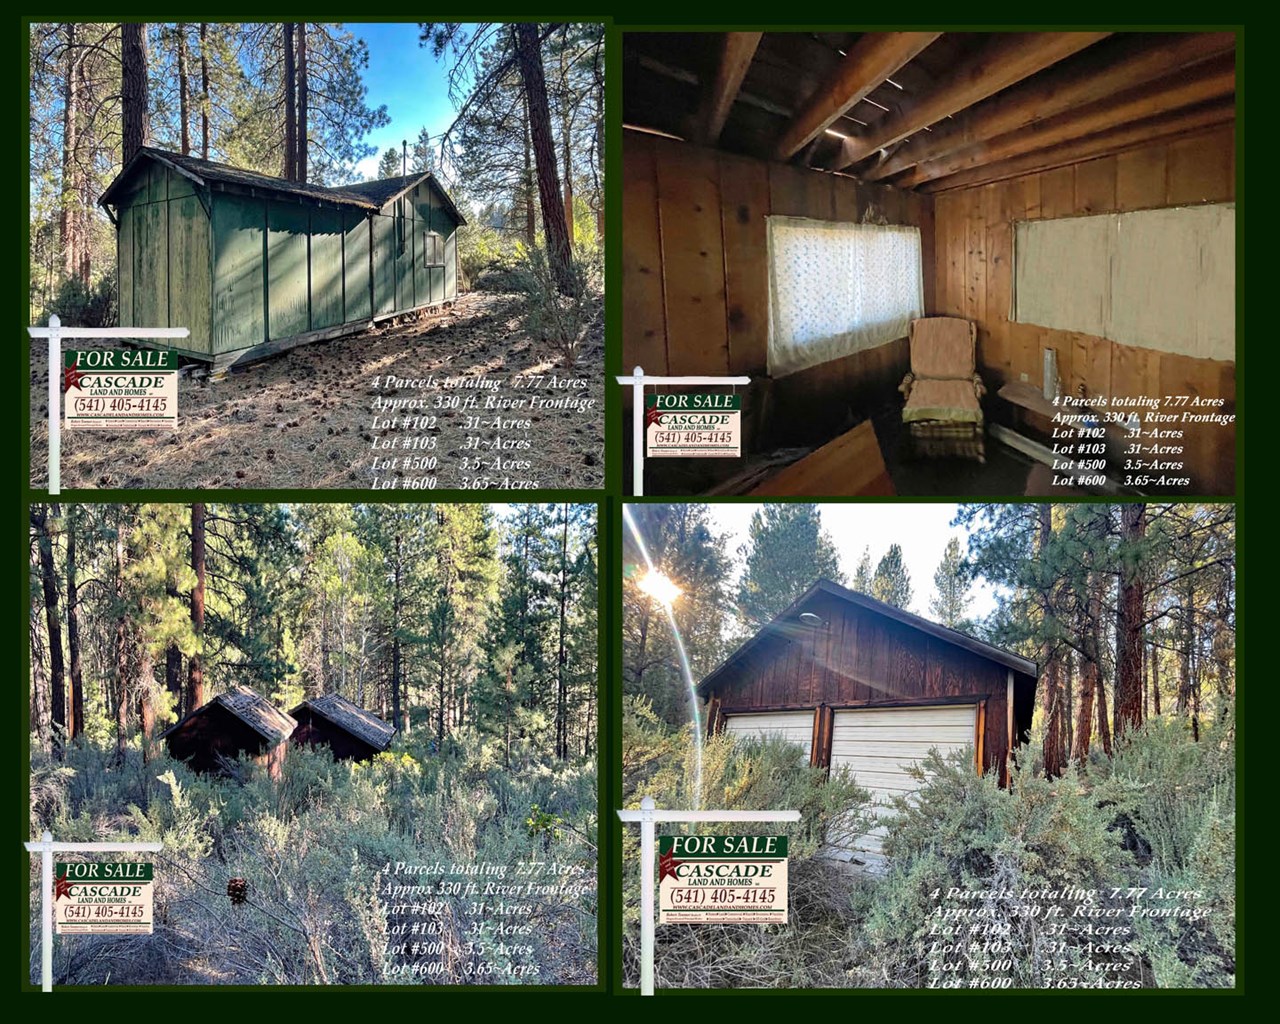 a small cabin and garage have been added to the property. families who have owned this property previously have added a small rustic cabin and a two car garage so they could use it for a base-camp or family camping spot. 



mls # 220156878 
lot #102, #103
2610/2620 south chiloquin road, chiloquin, oregon